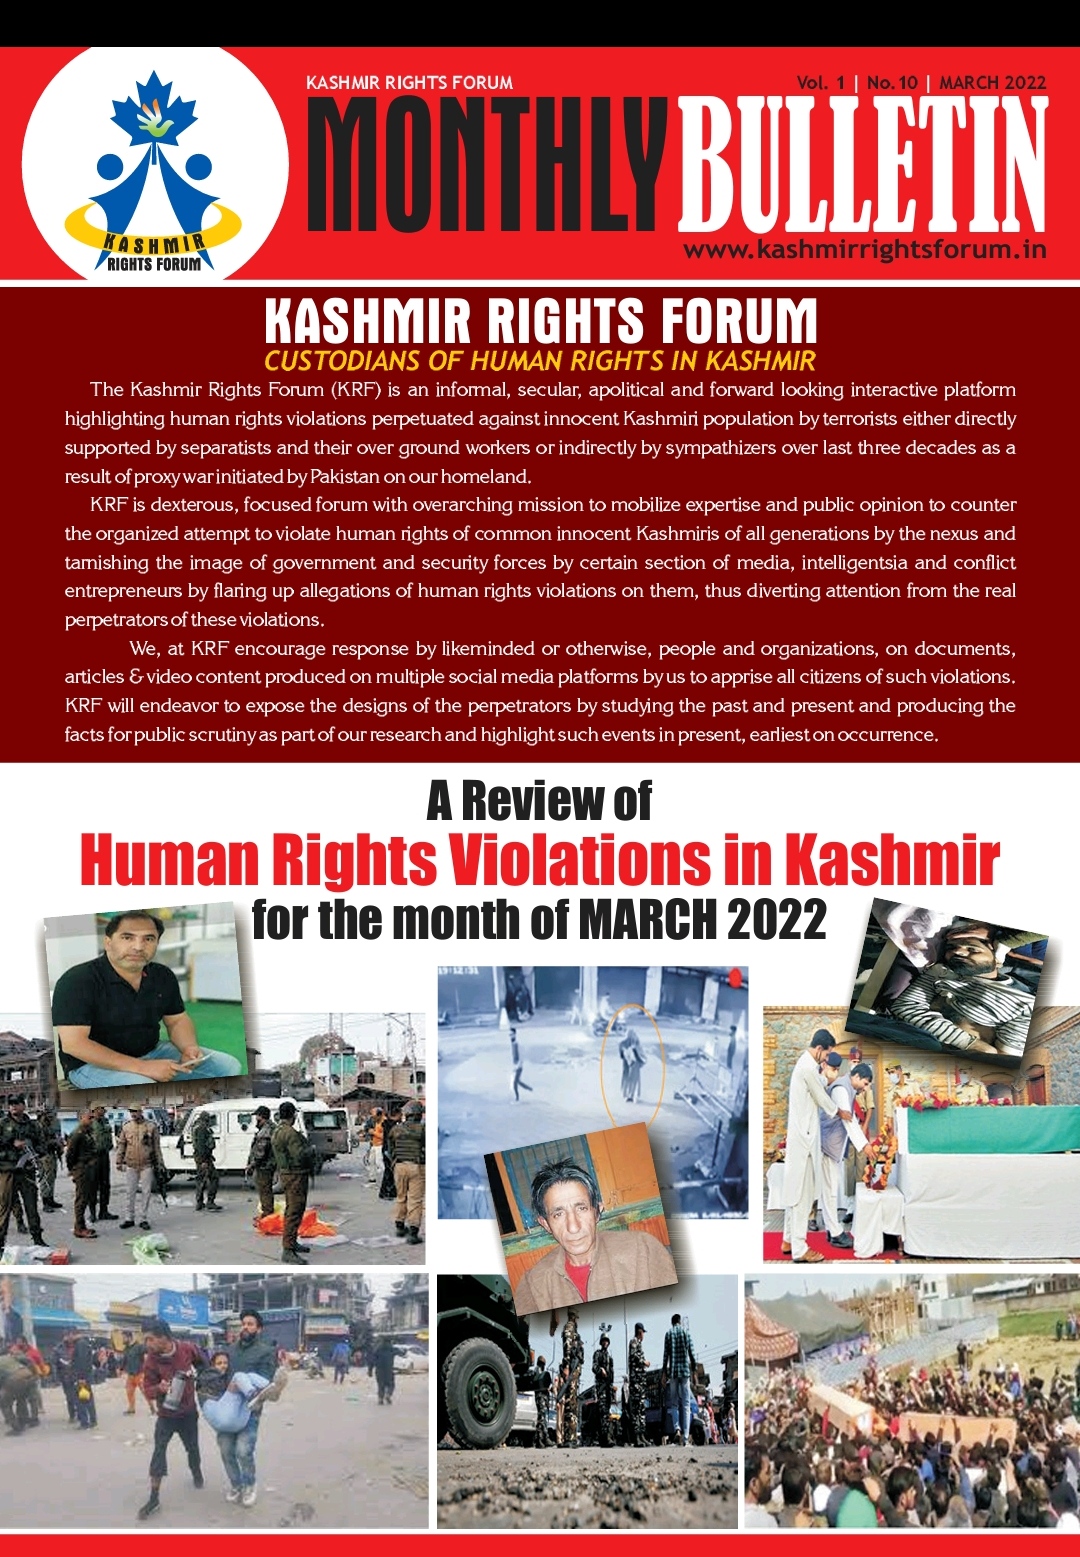 A preview of Monthly Bulletin April 2022 comprising of human rights violations in Kashmir.